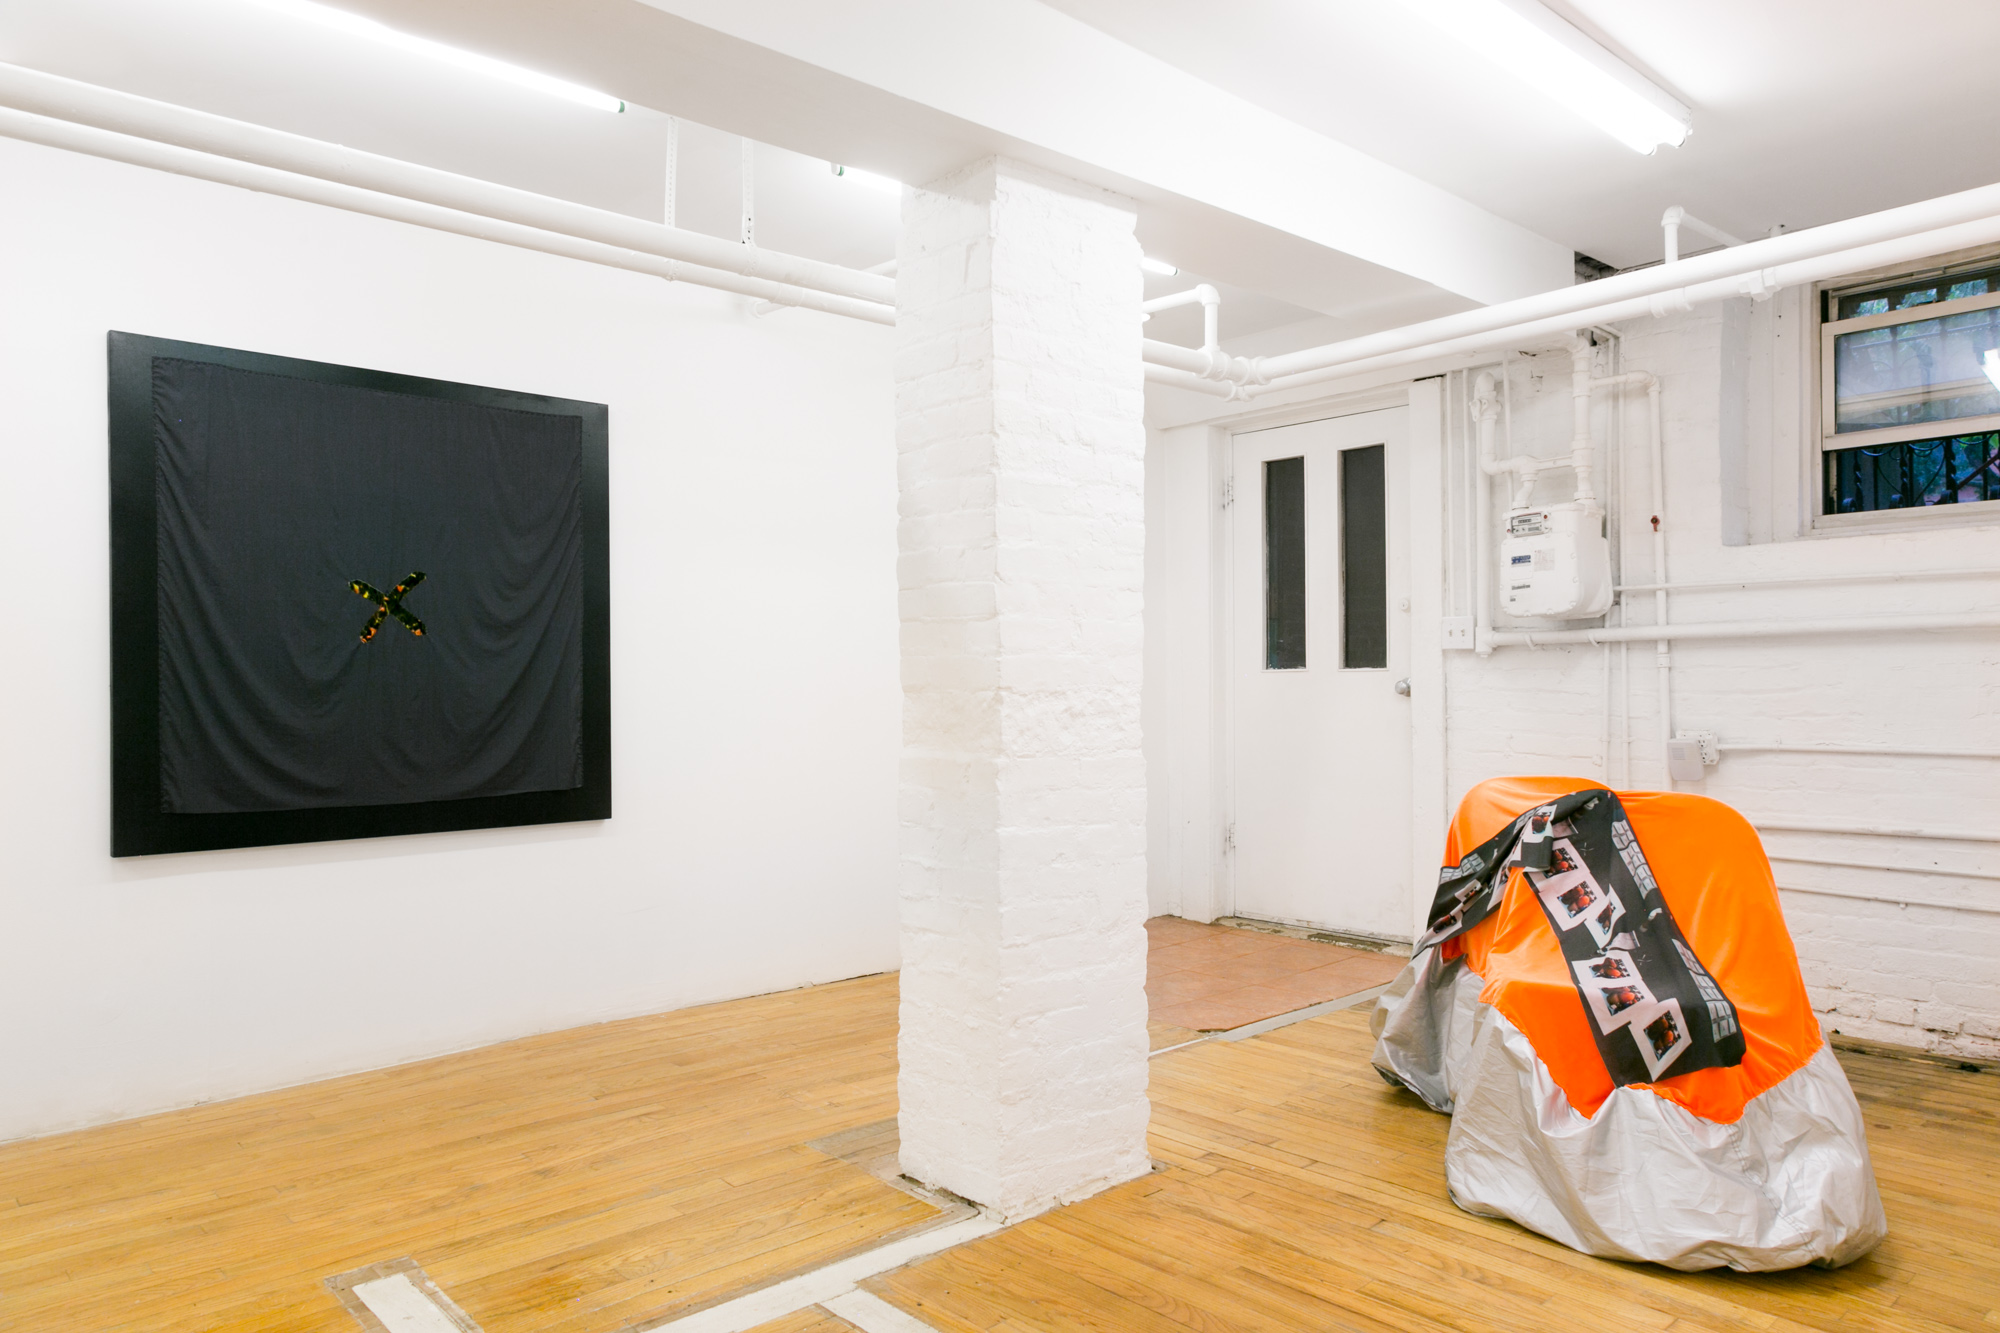  Installation view, Laura Hunt,  Motorcycle Covers , 2018, 321 Gallery, Brooklyn, NY. 